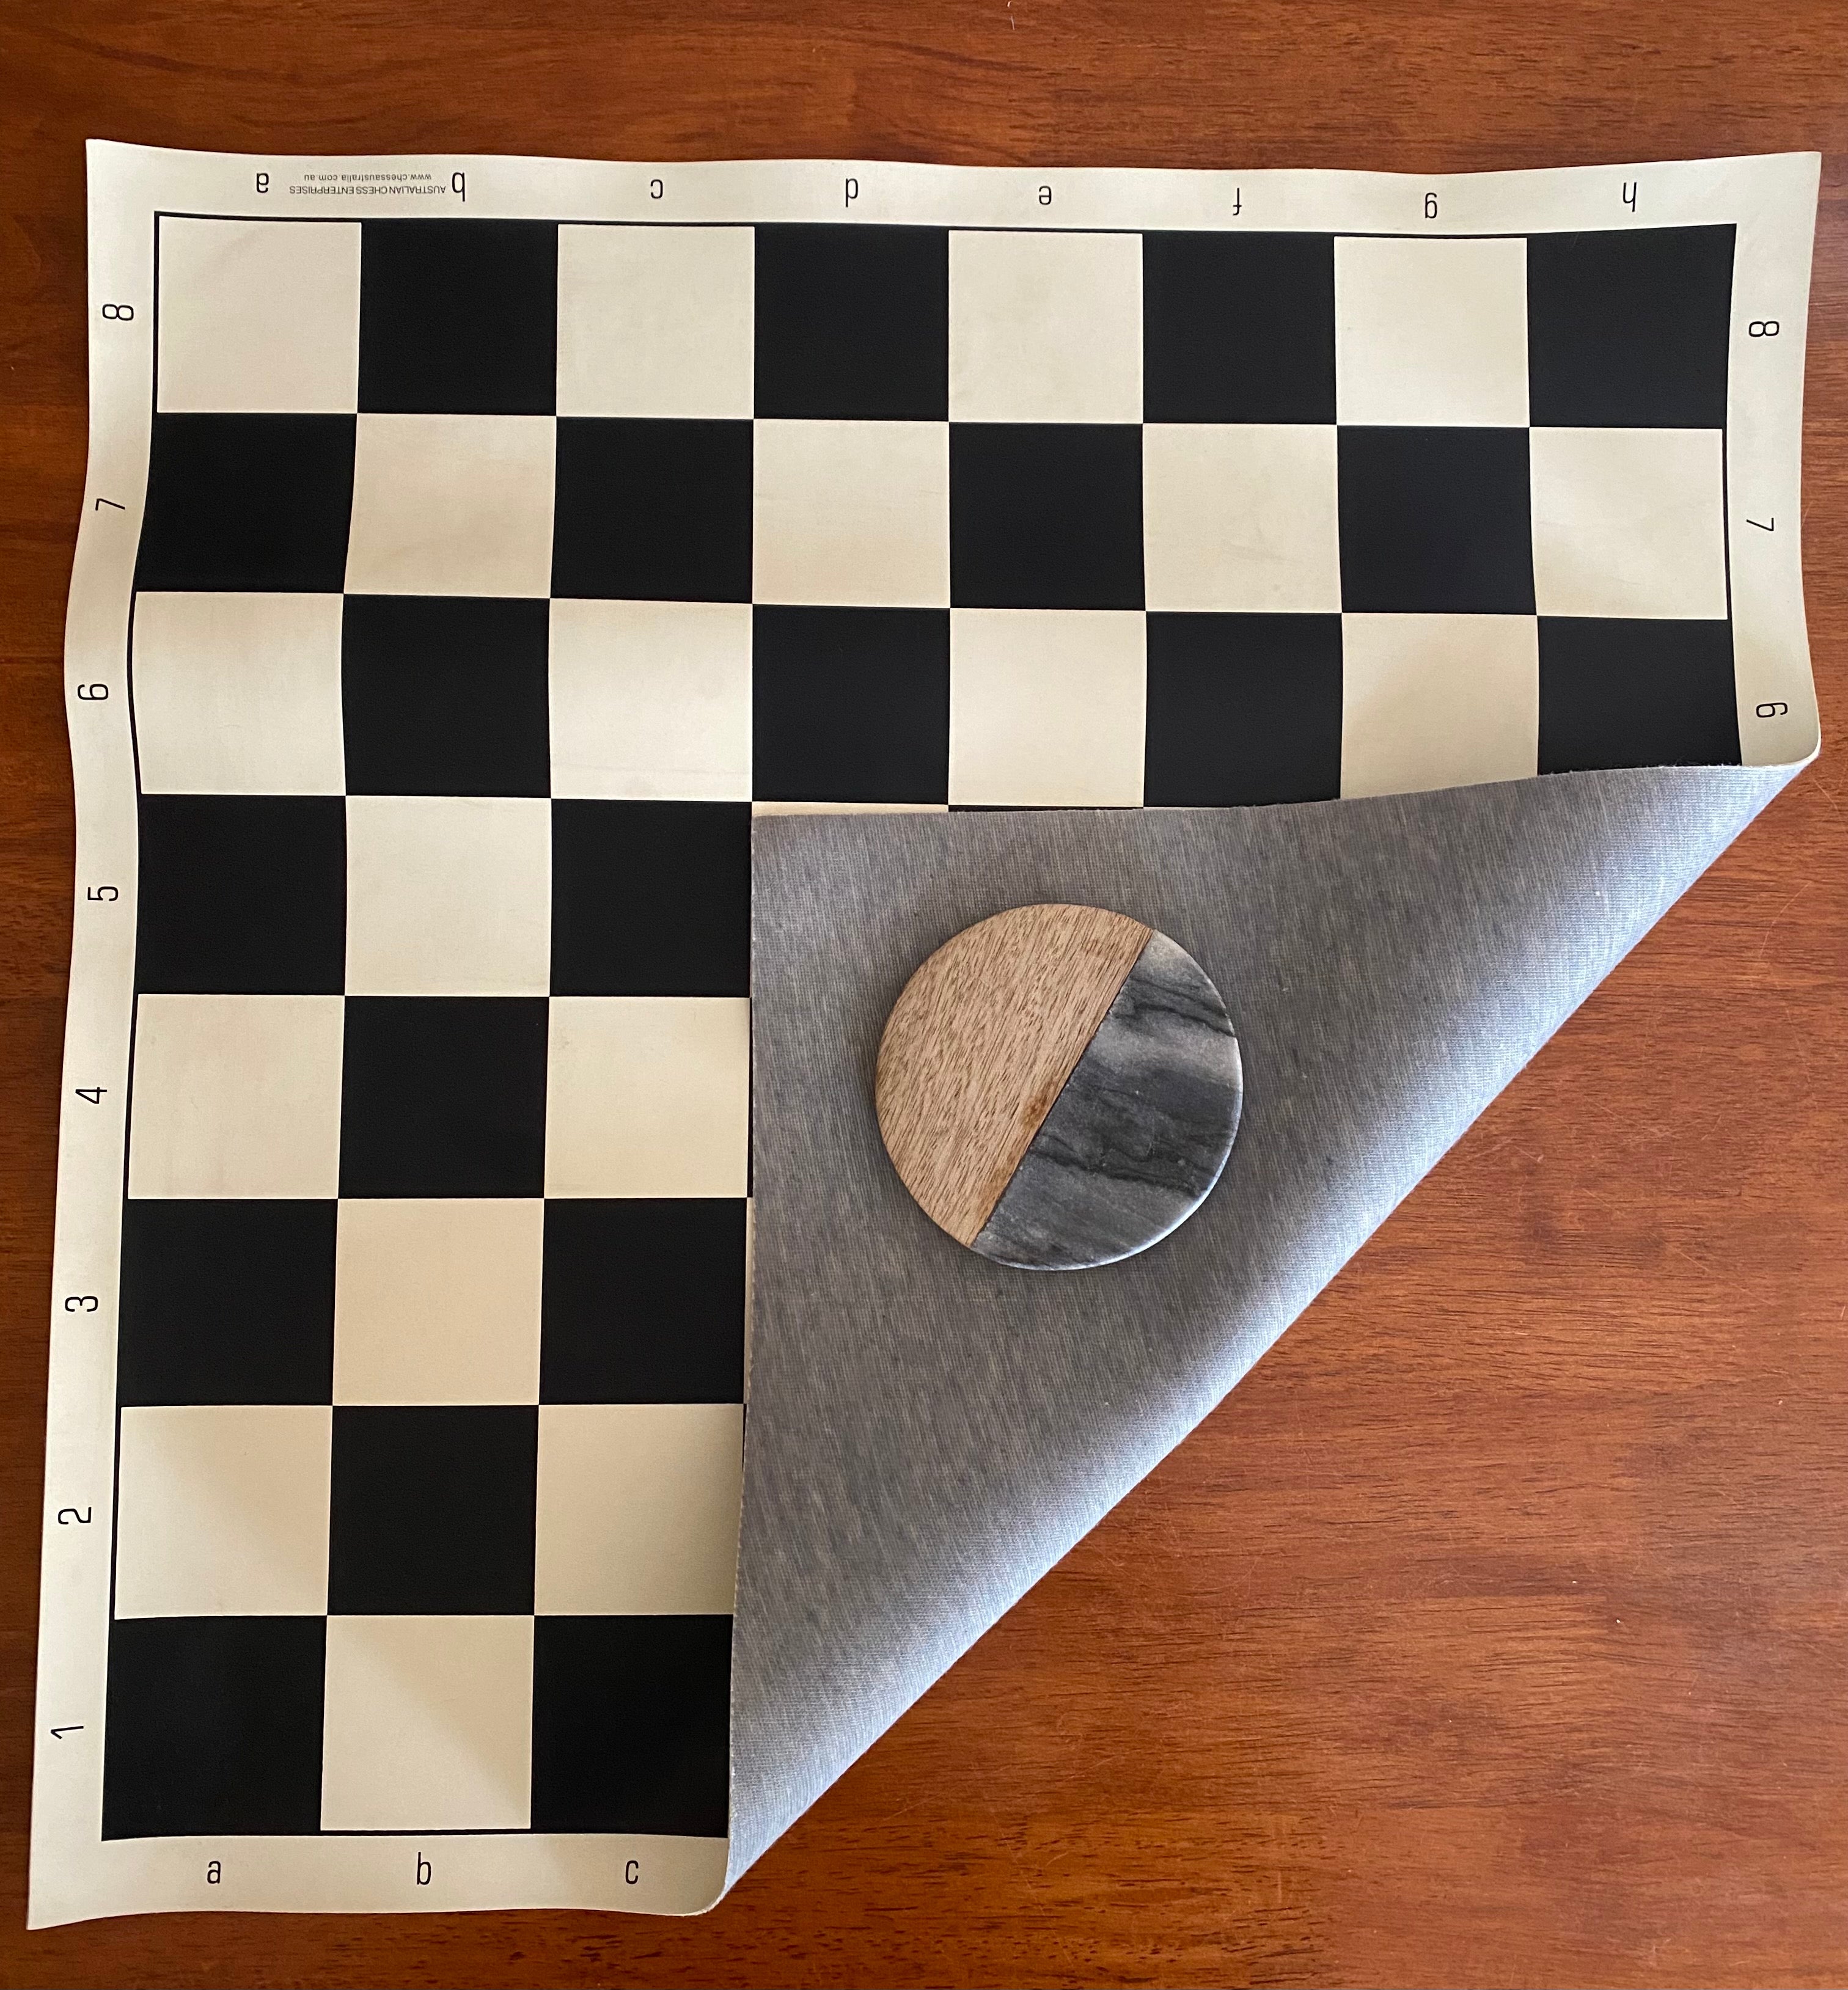 Tournament Chess Board + Pieces